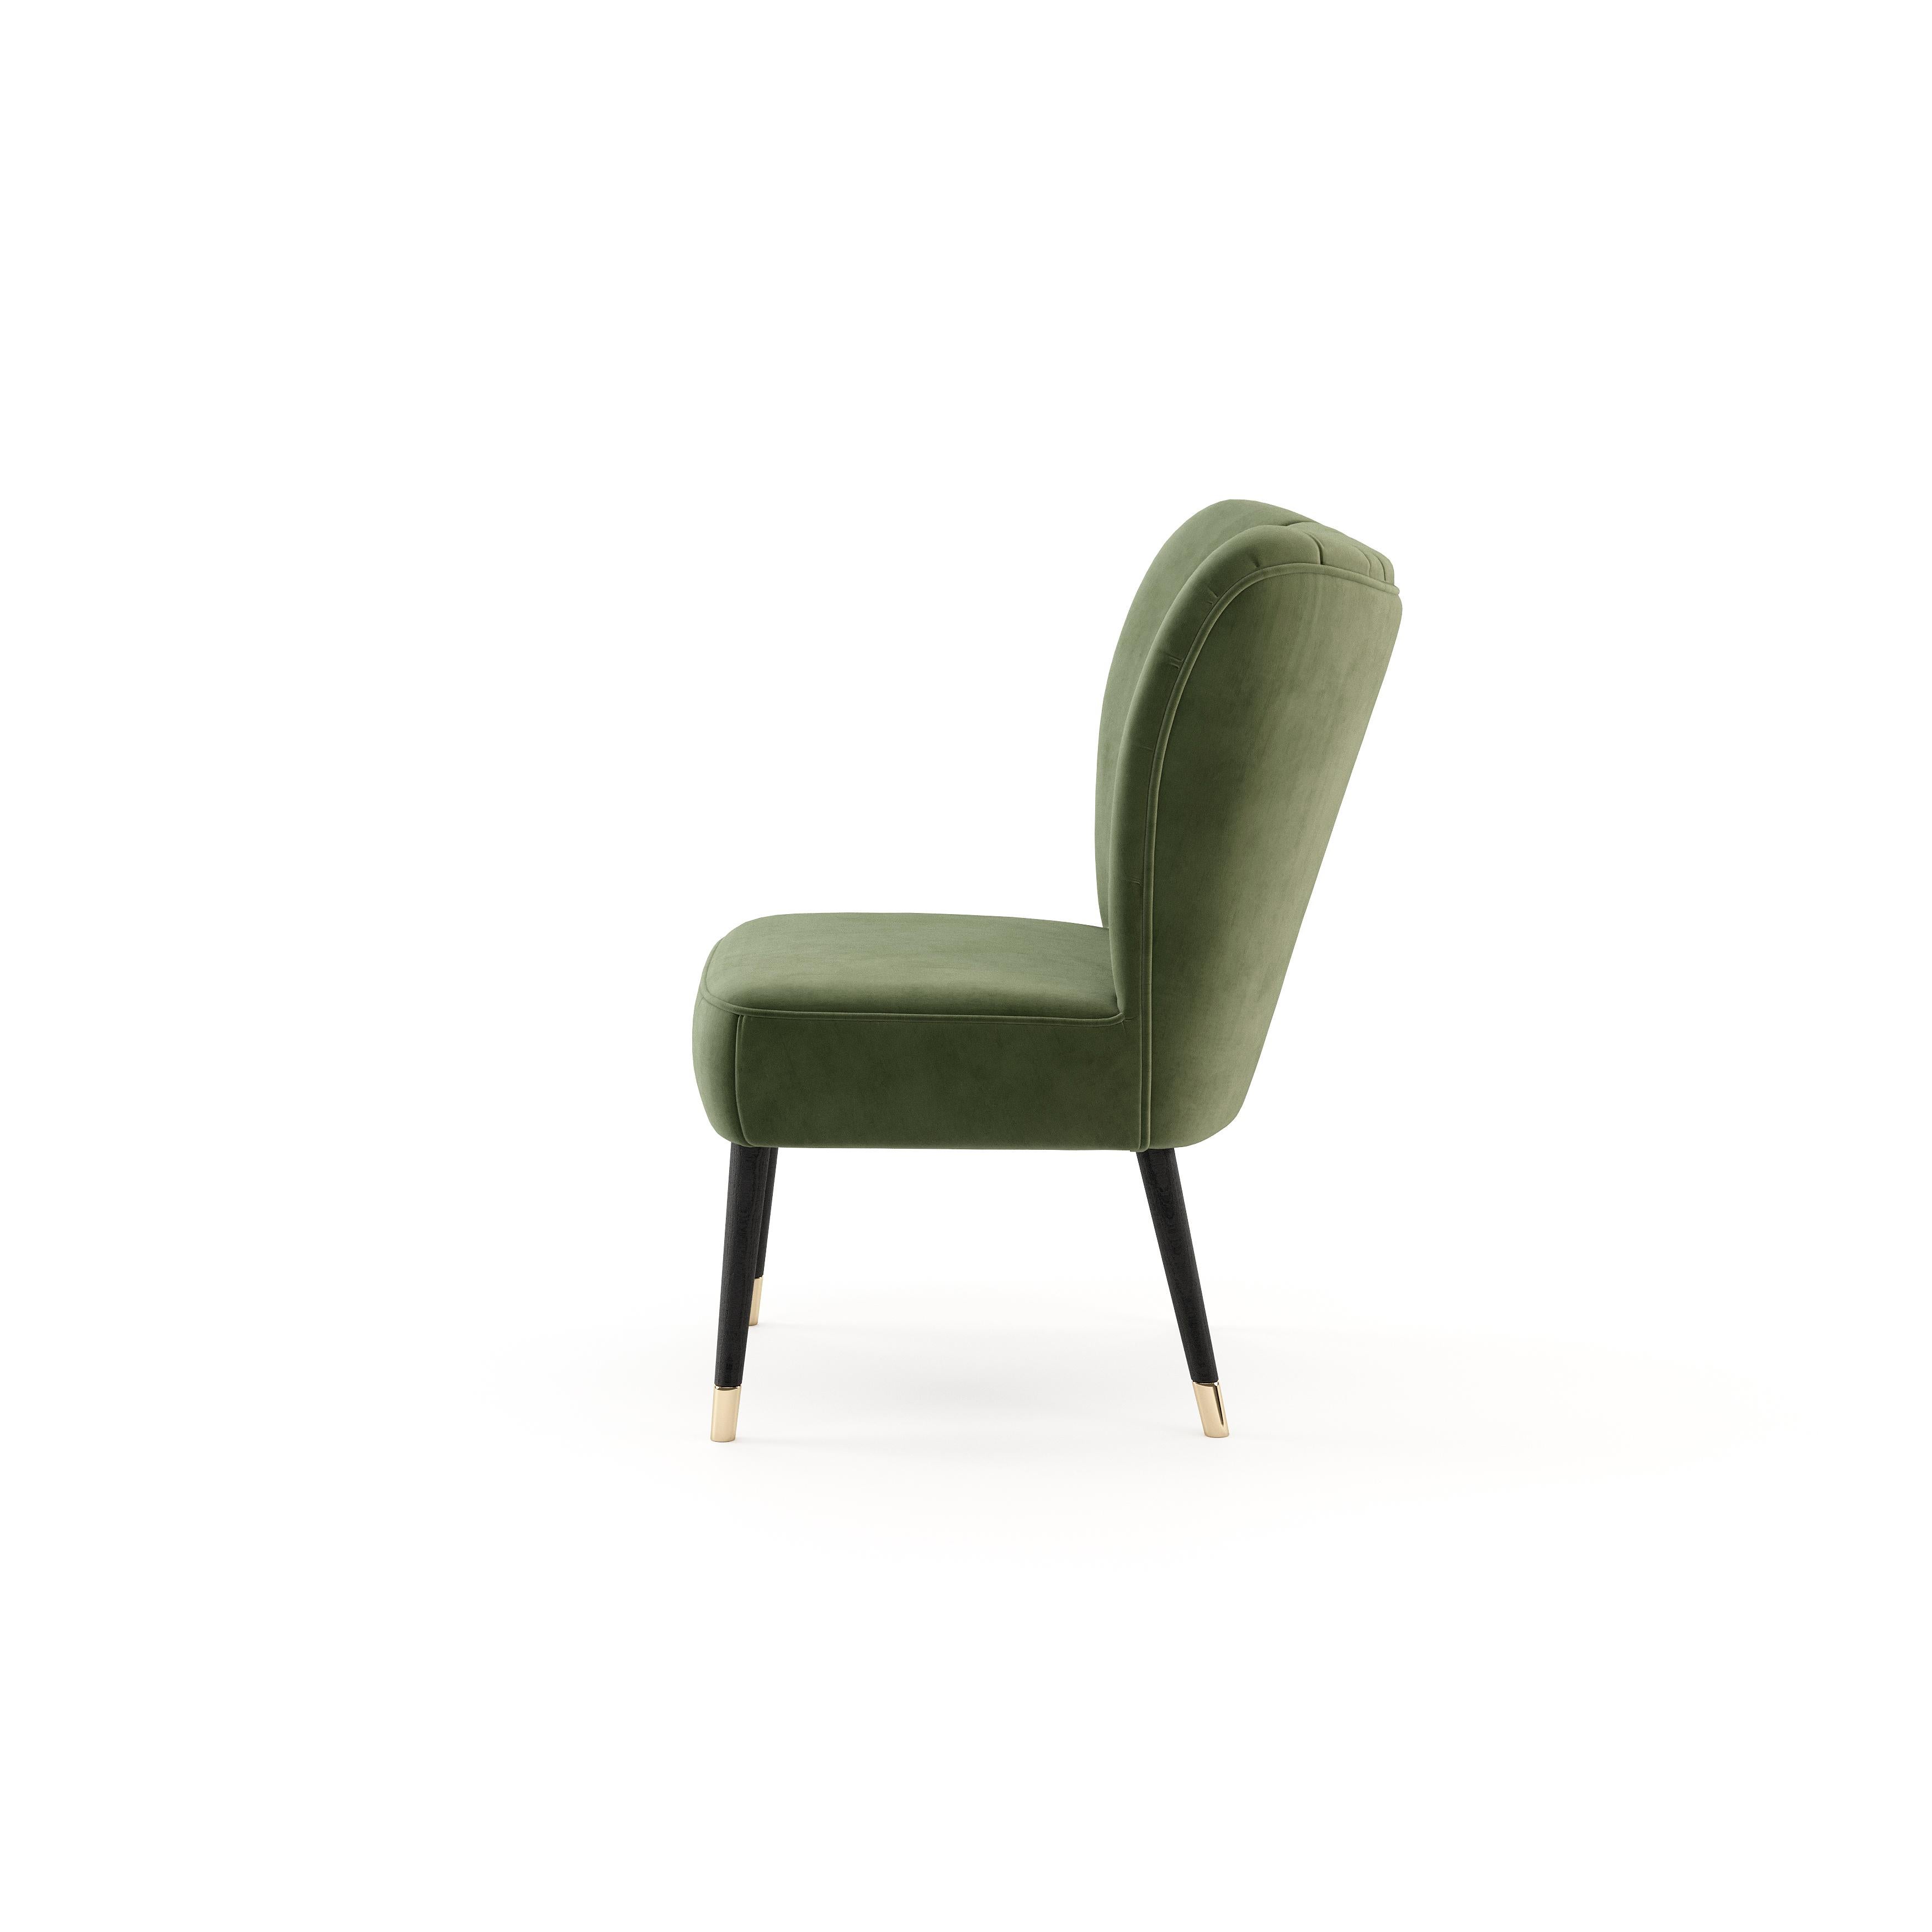 The enchanted soul of Moon is the inspiration for Moon armchair style and individuality. Beautifully handcrafted by our artisans, this is a marvellous velvet armchair with a high curved back, cushion seat and wood legs.


* Available in different